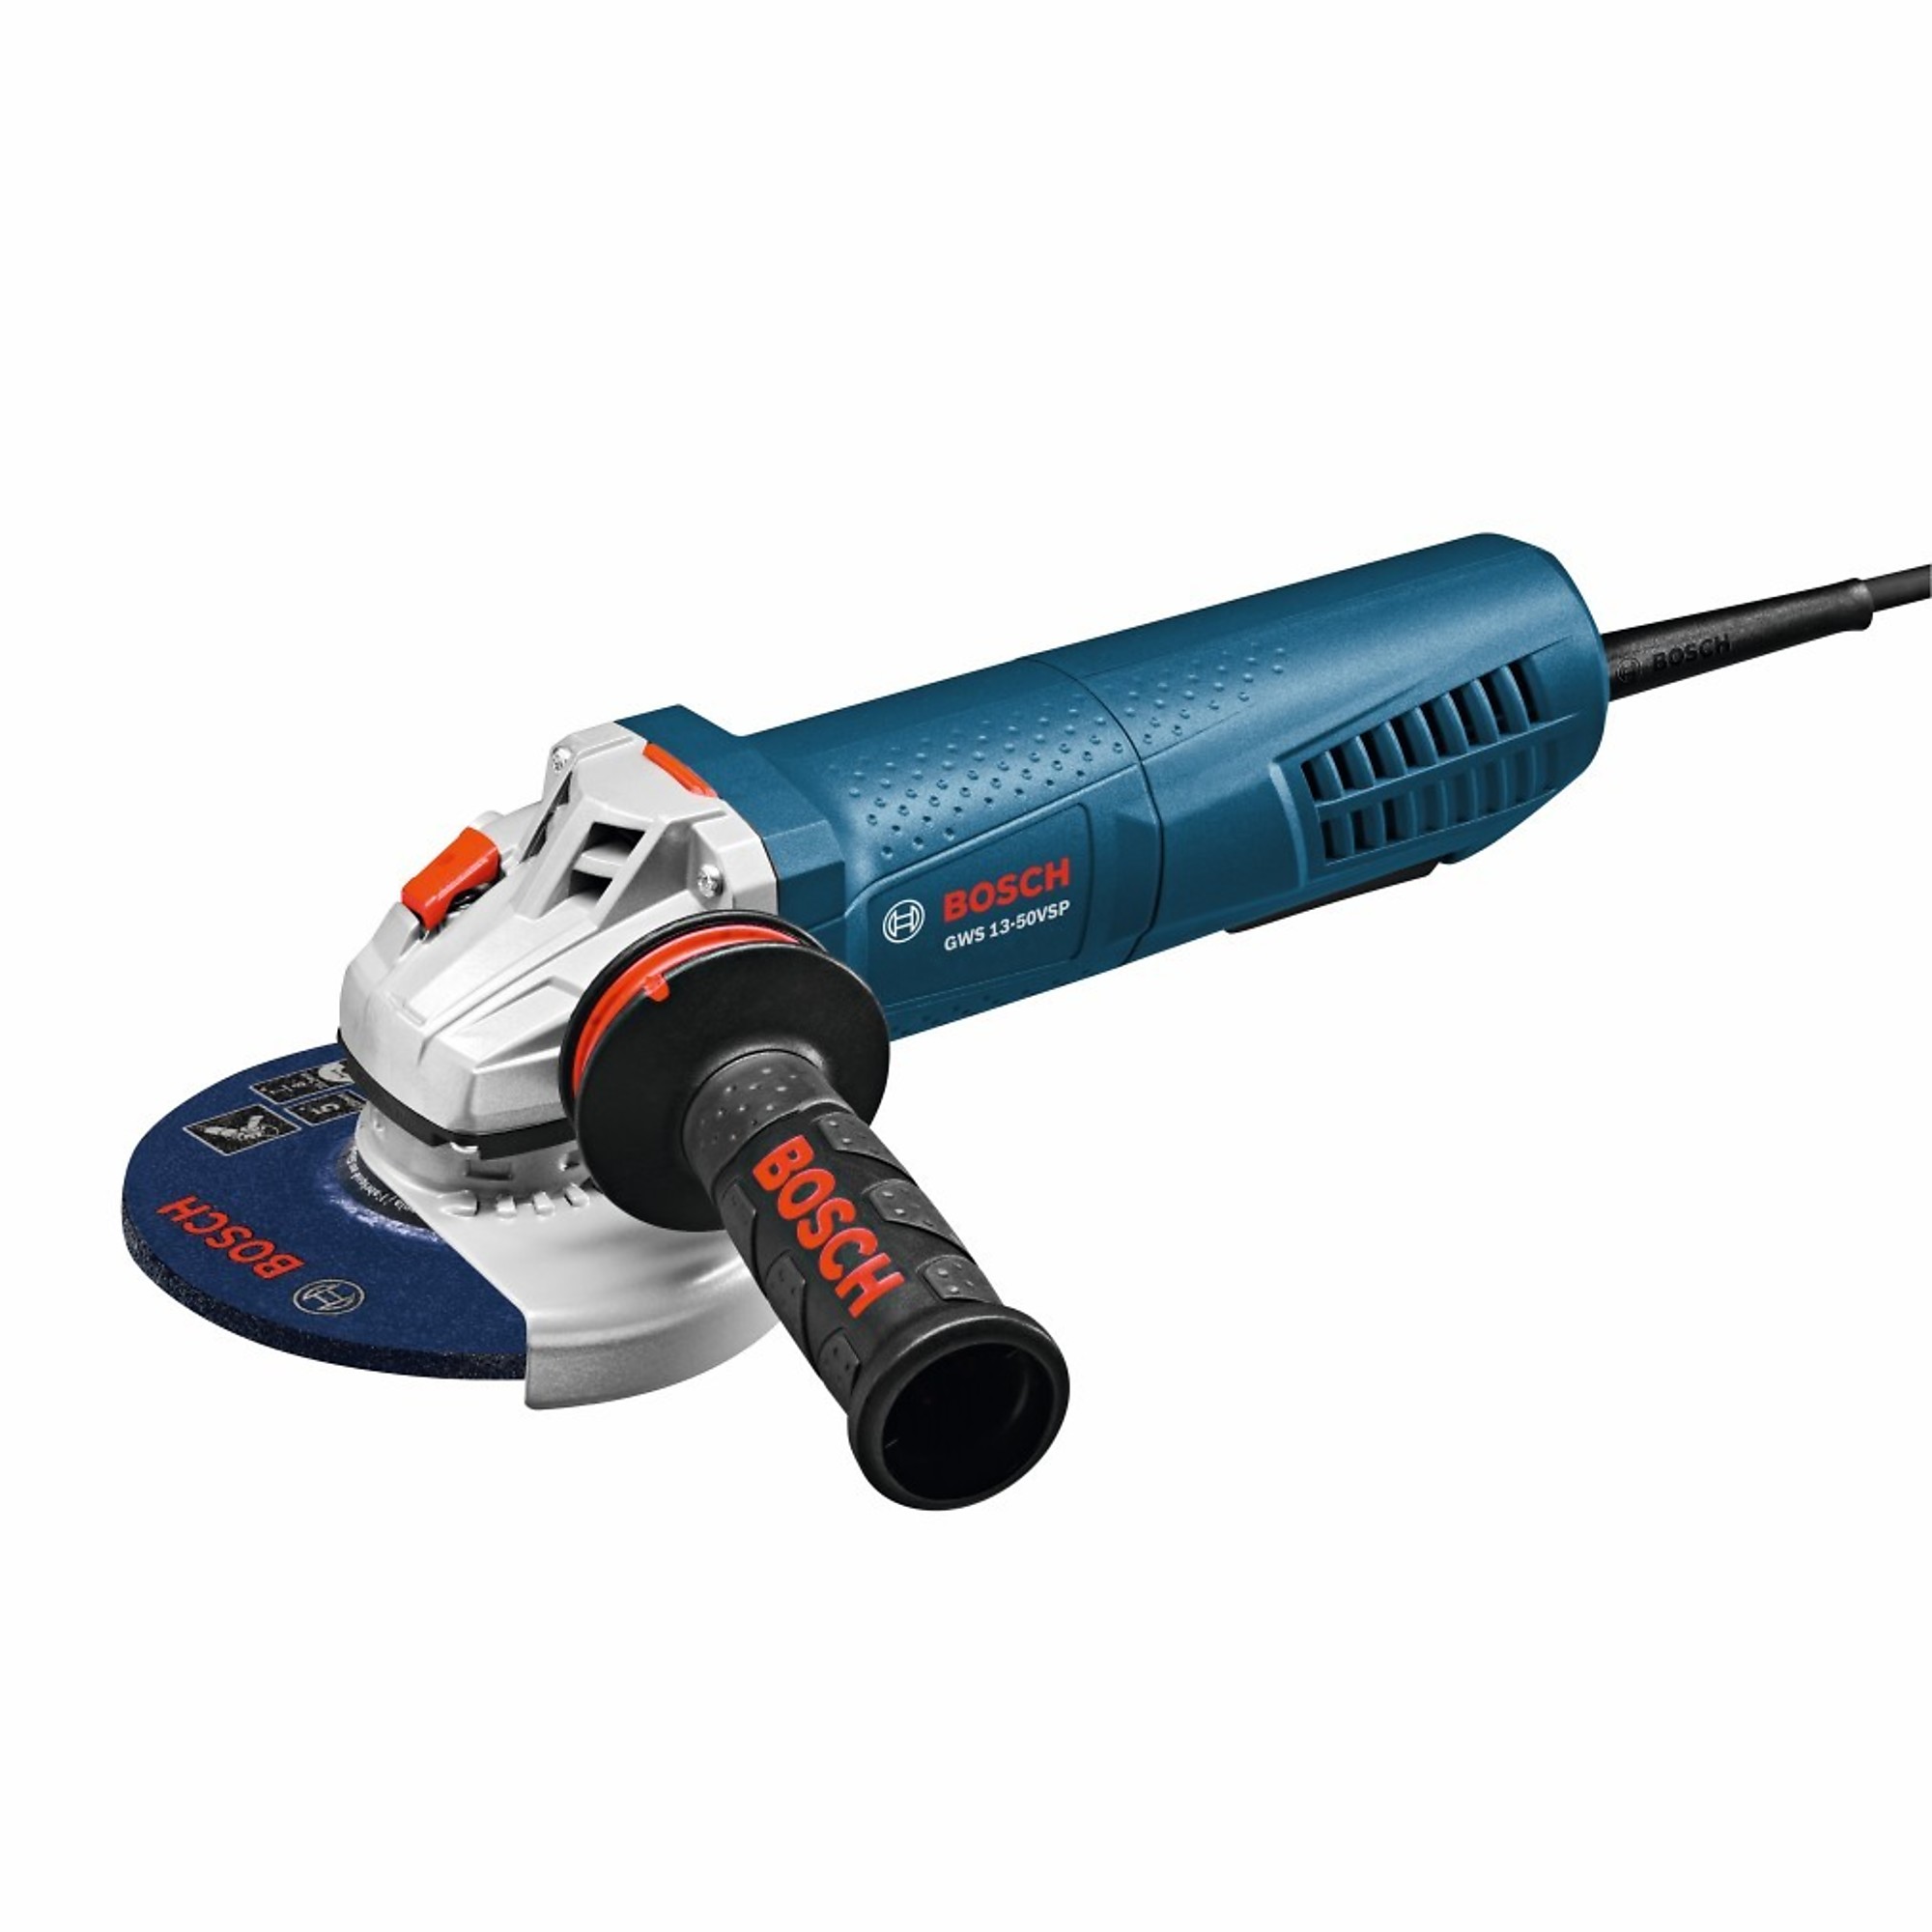 Bosch, 5Inch Variable Speed Grinder - 13 Amp w/ Paddle, Wheel Diameter 5 in, Amps 13, Volts 120, Model GWS13-50VSP